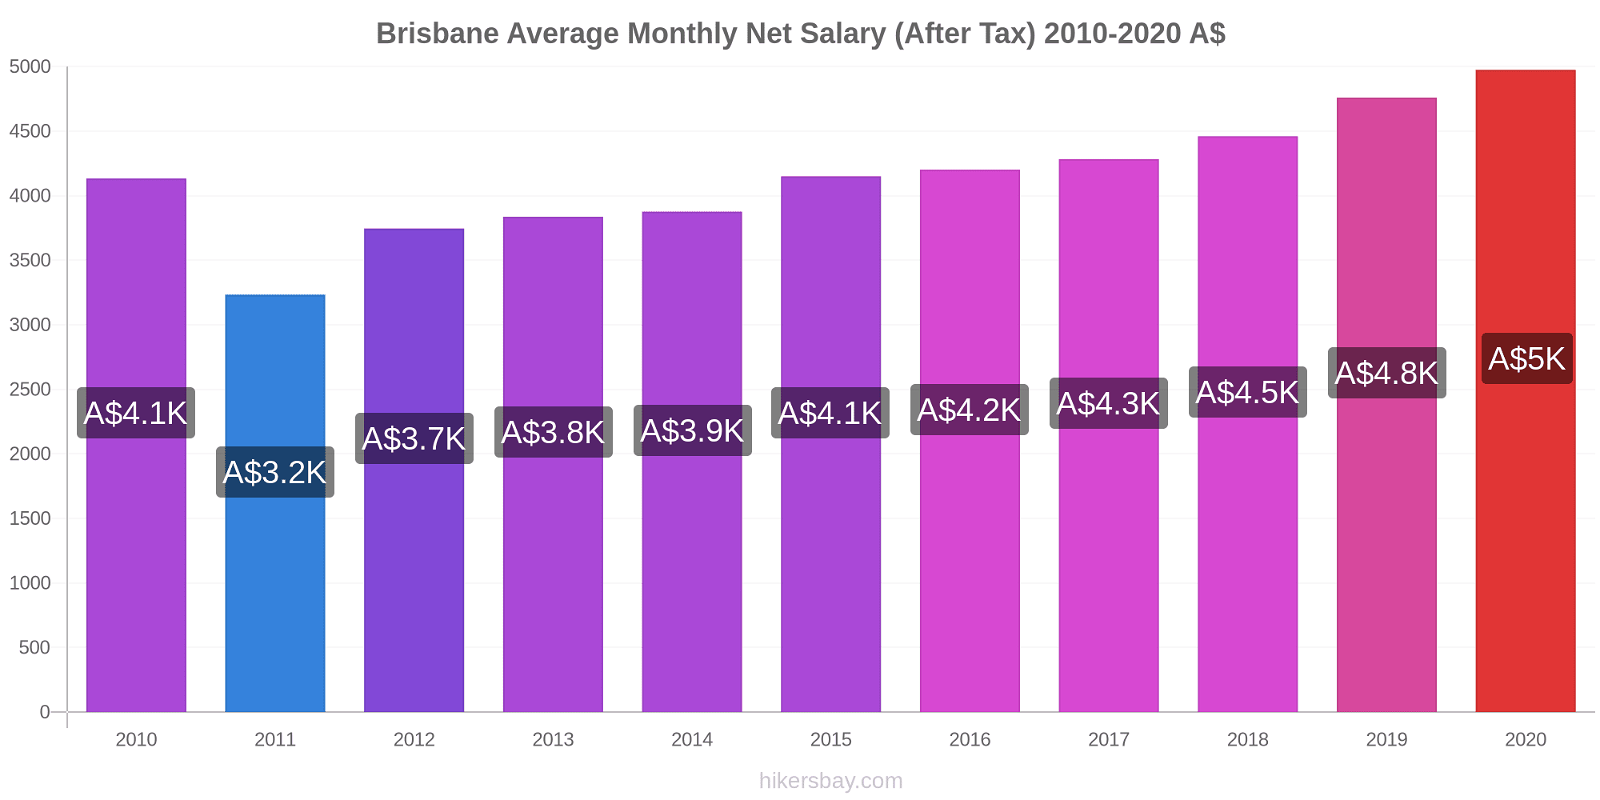 Brisbane price changes Average Monthly Net Salary (After Tax) hikersbay.com